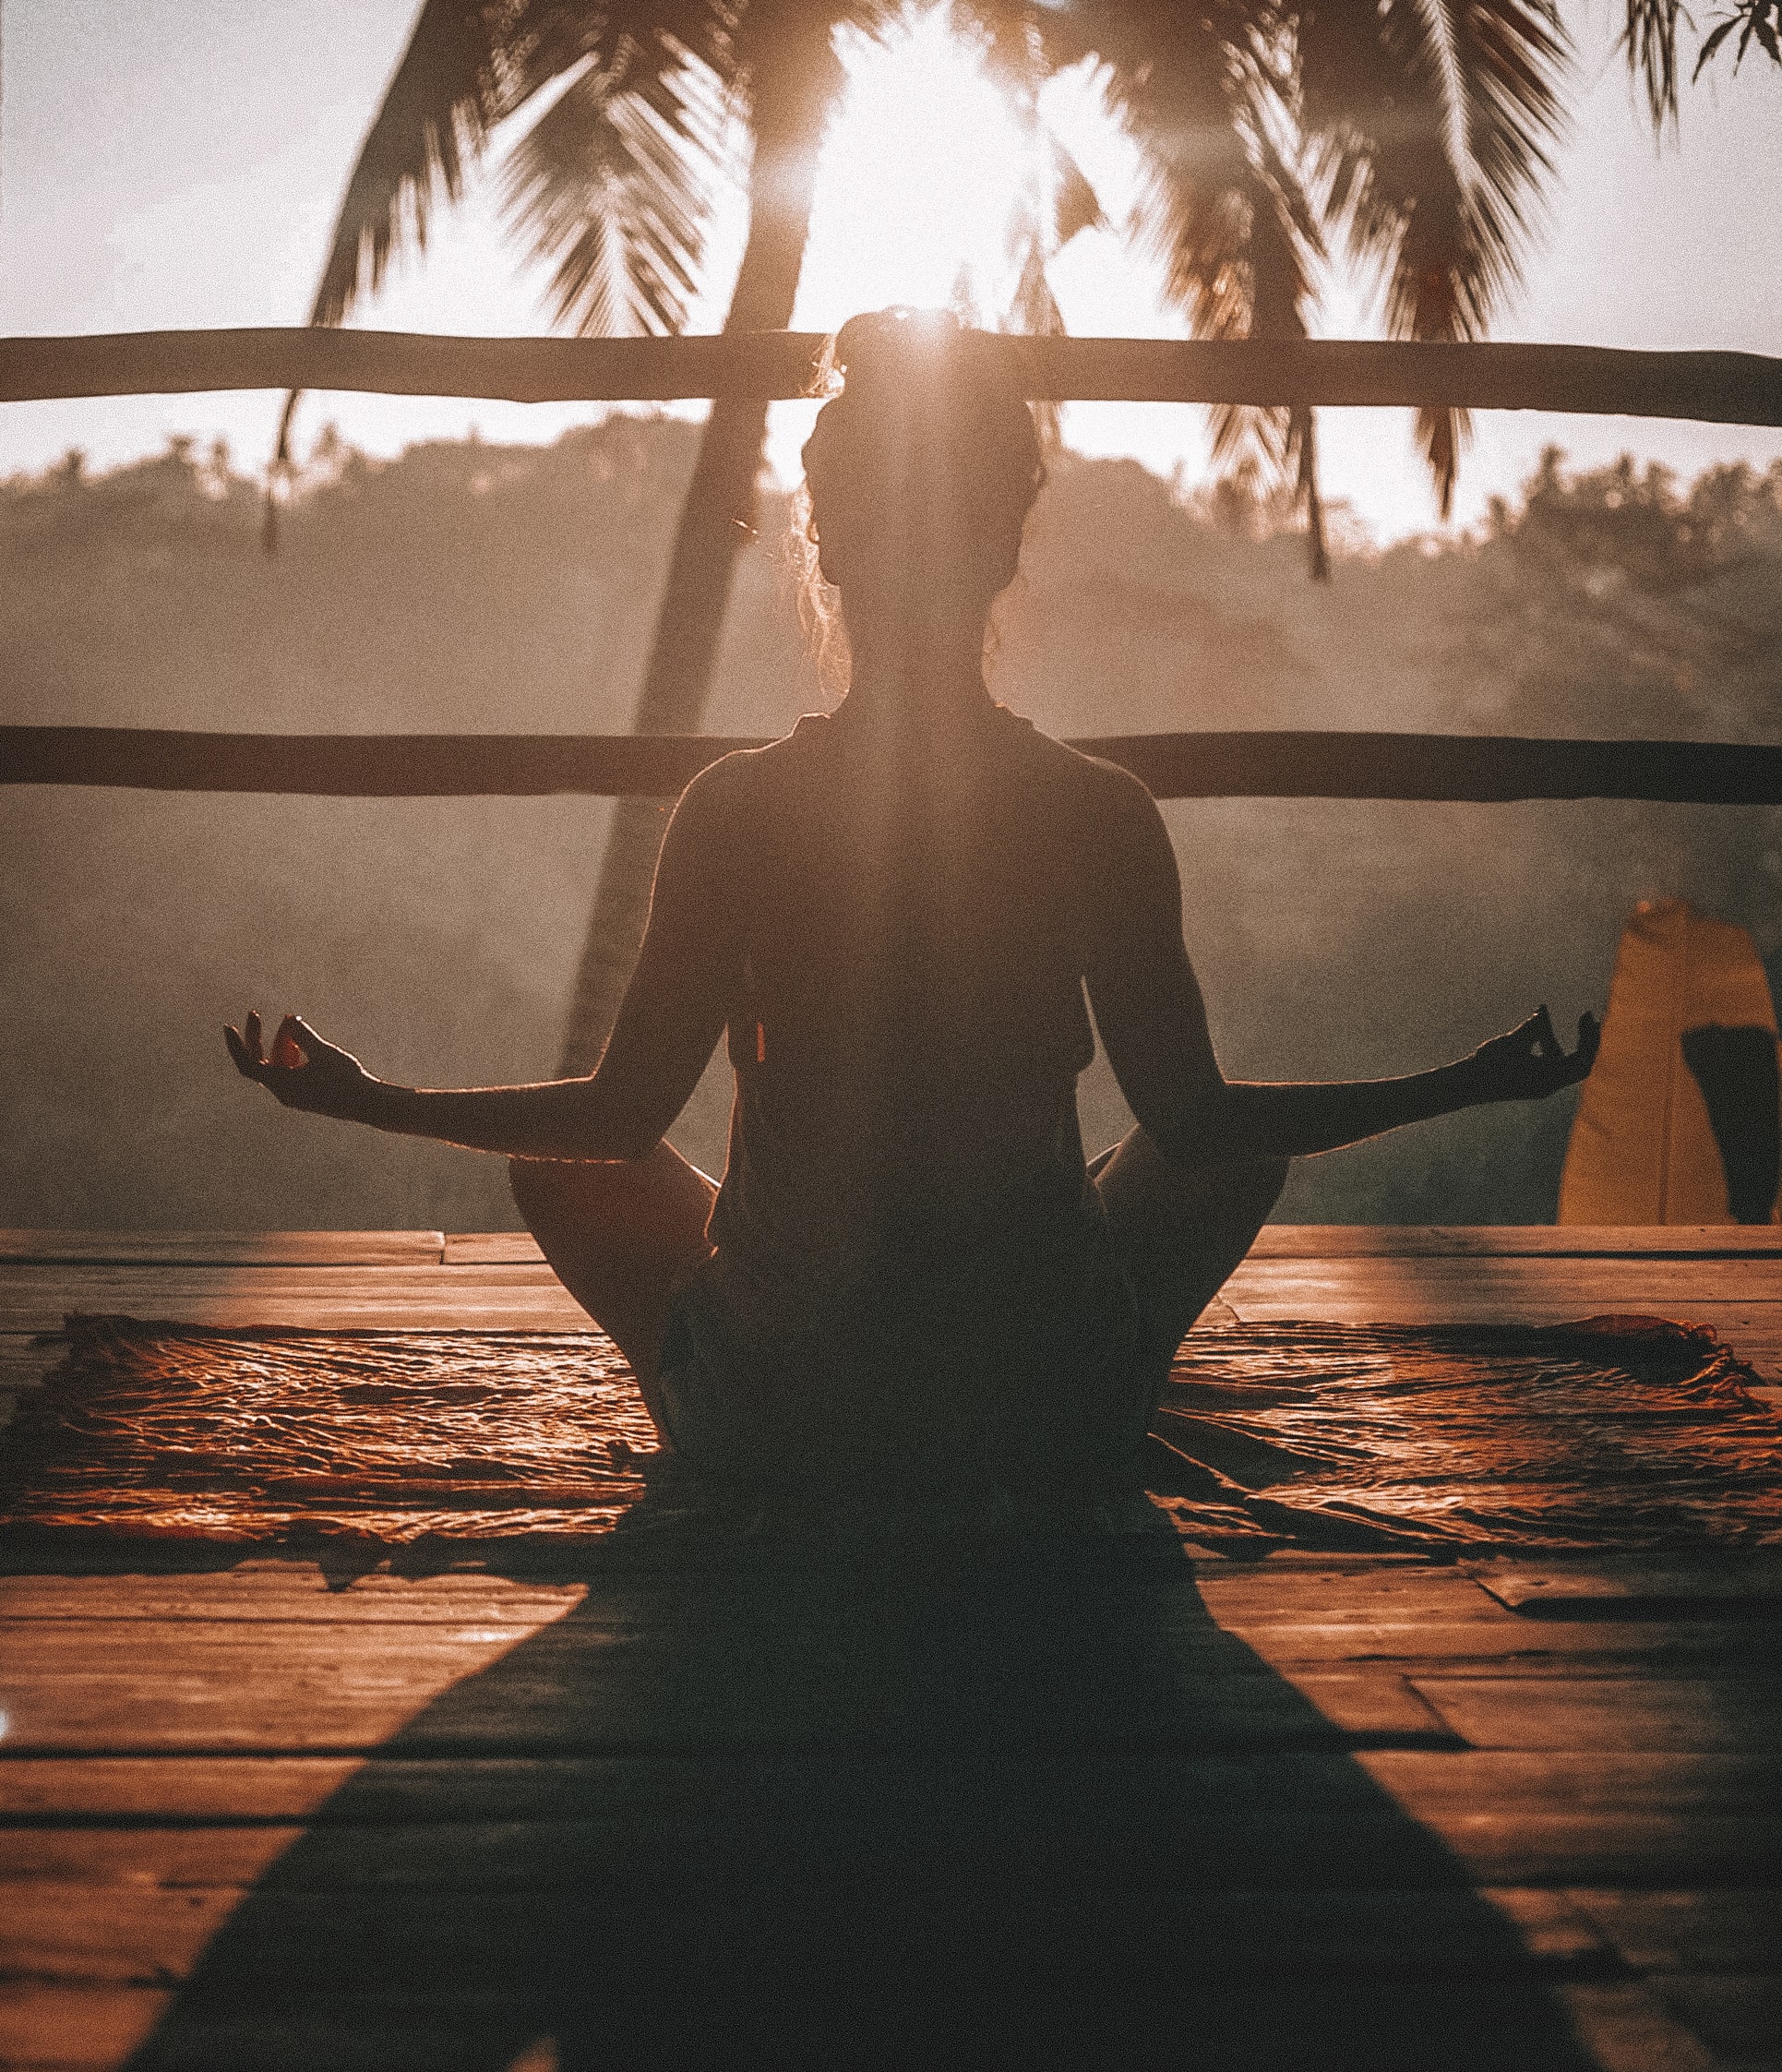 The Art of Mindful Meditation: Your 5 Great Life-Changing Benefits